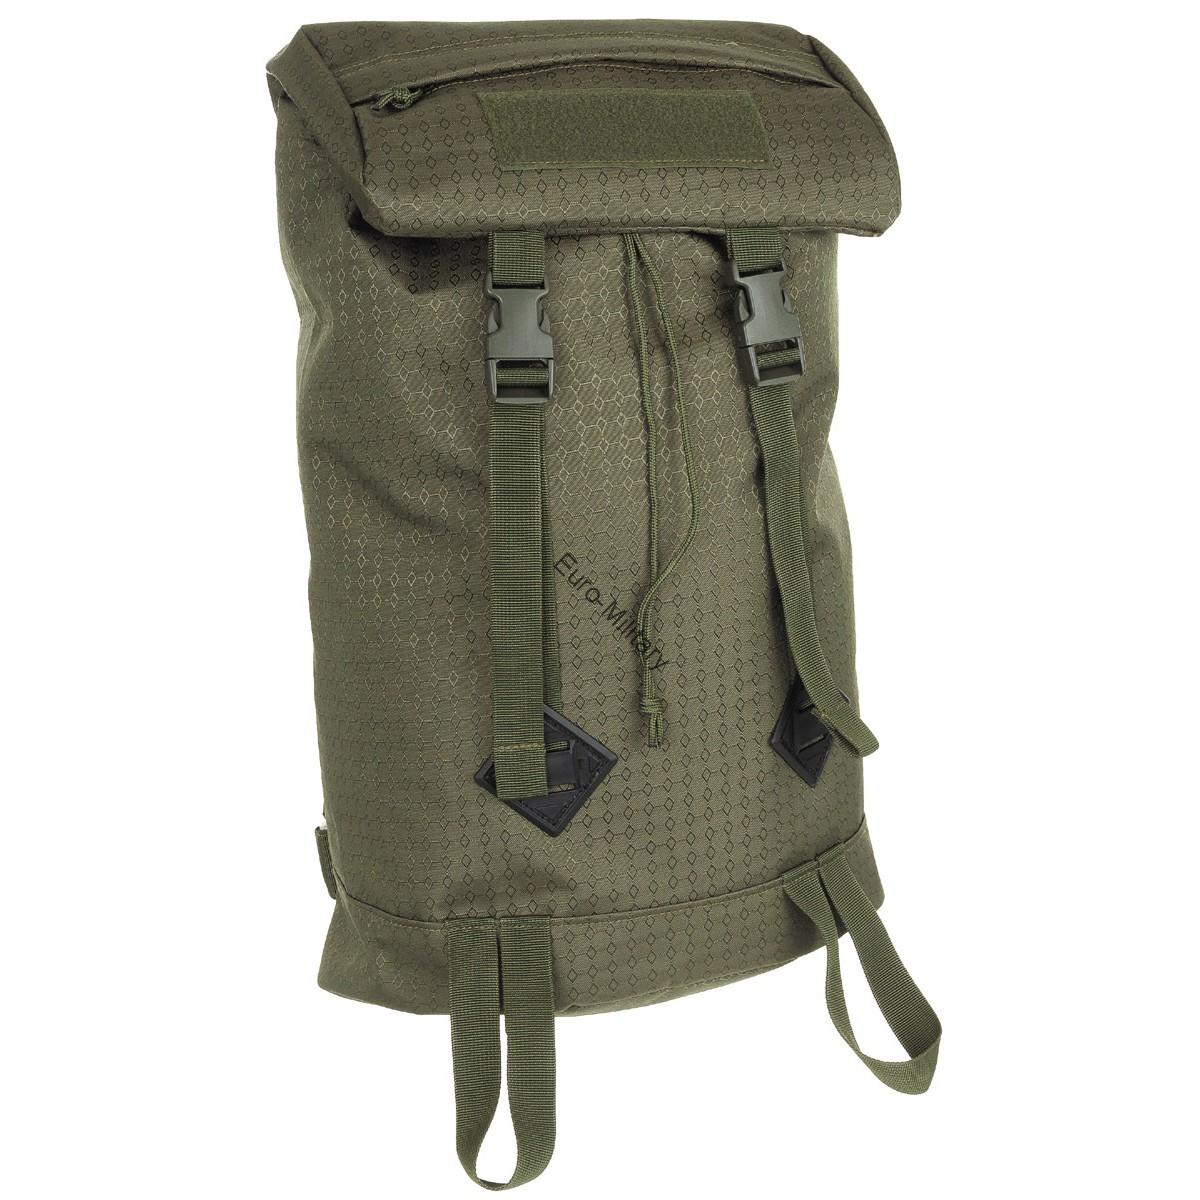 Stylish Outdoor City Backpack Bag "Bote" OctaTac 25L - Green